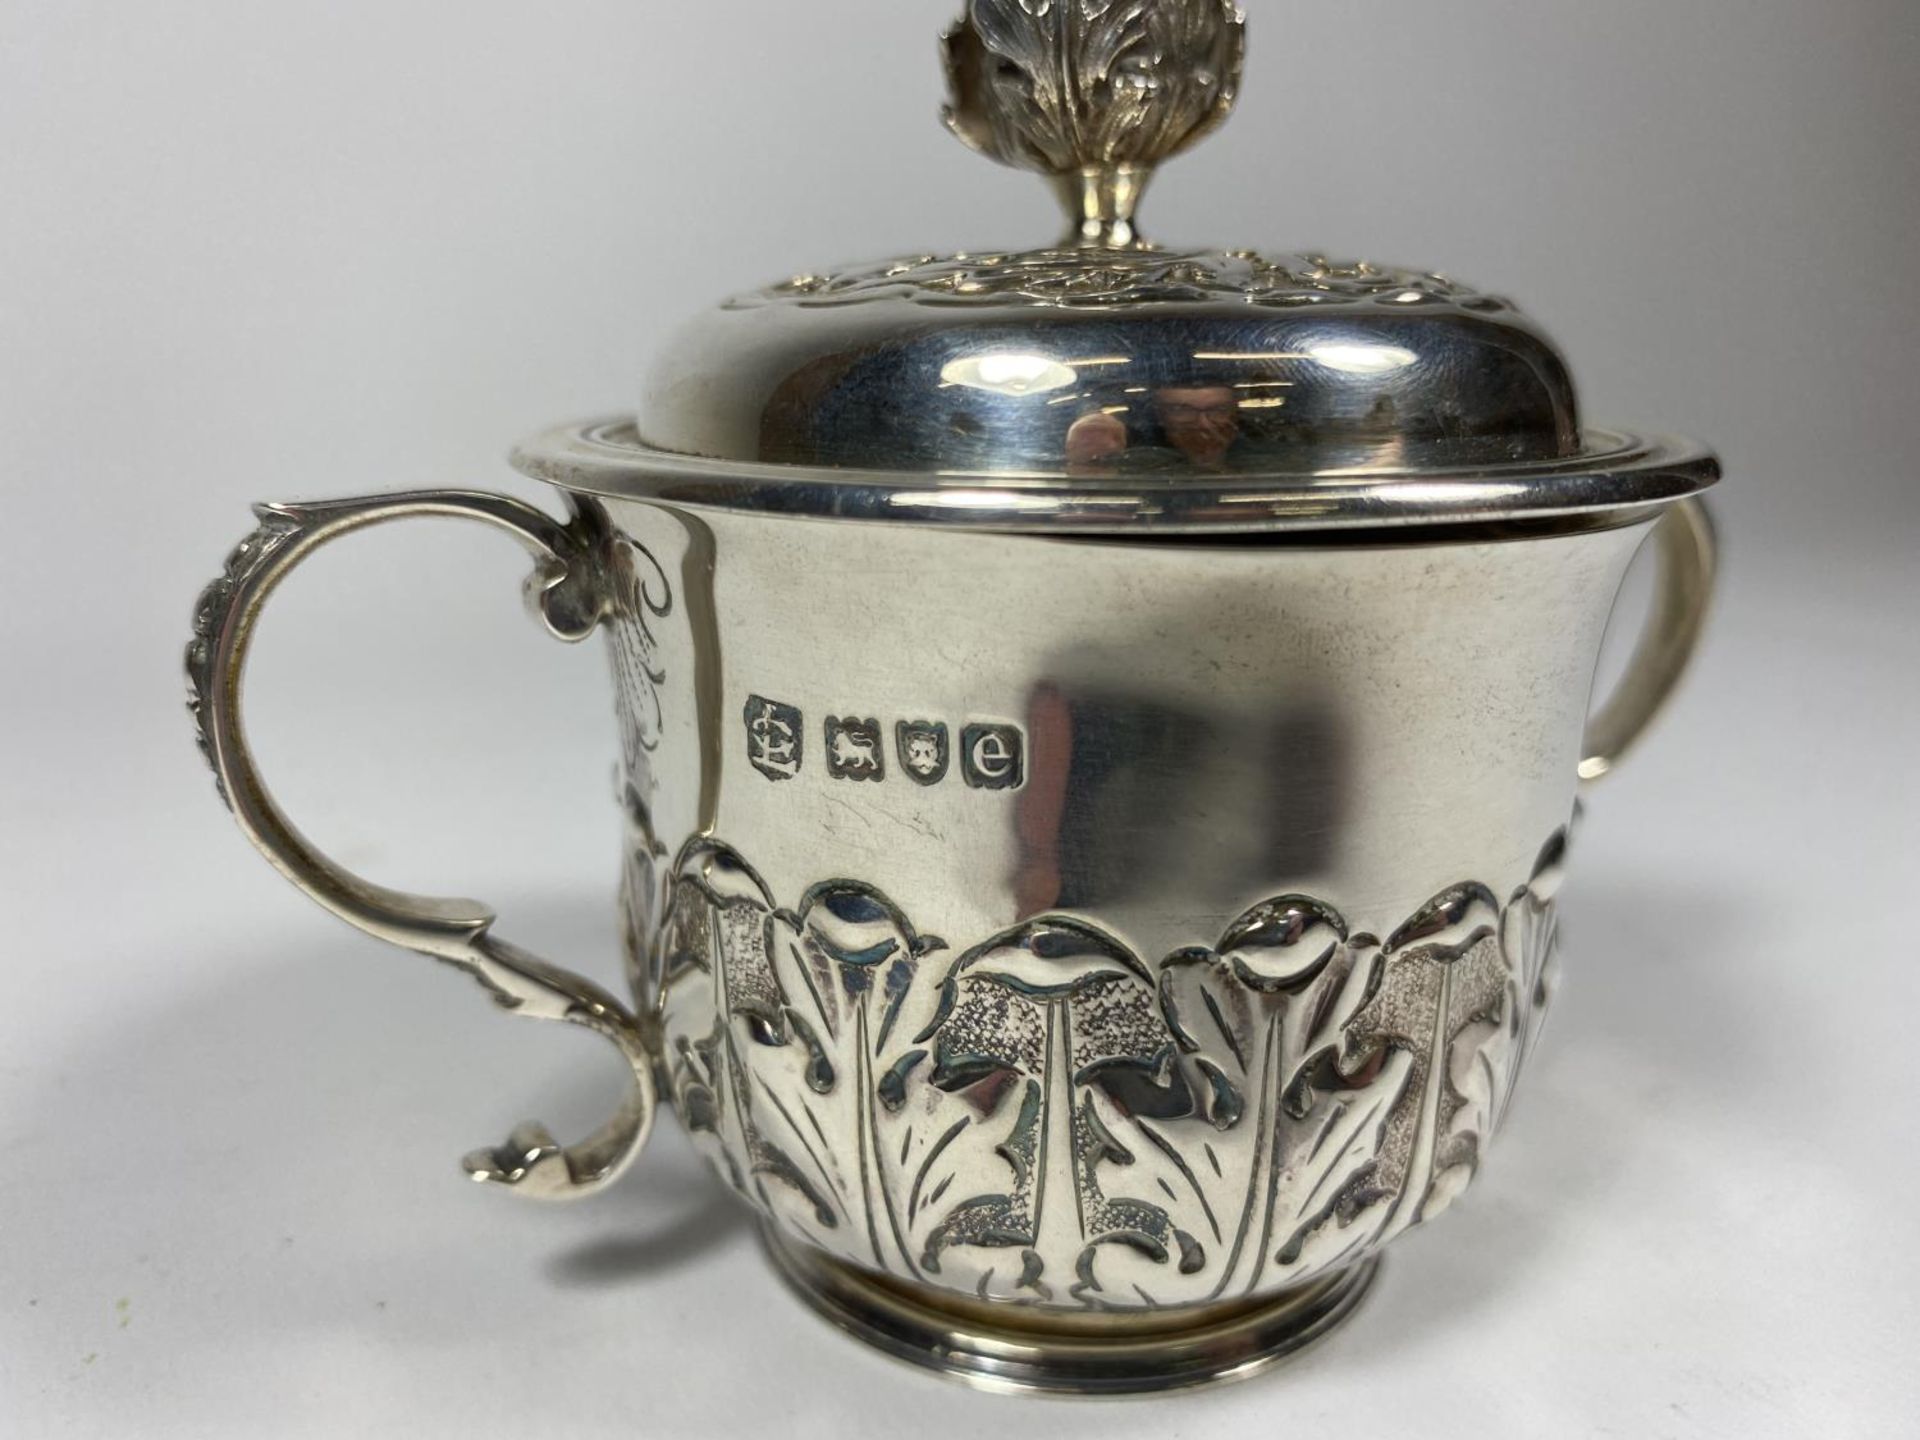 A VICTORIAN HALLMARKED SILVER LIDDED CHRISTENING CUP, MARKS FOR LONDON, 1900, WEIGHT 165G - Image 2 of 5